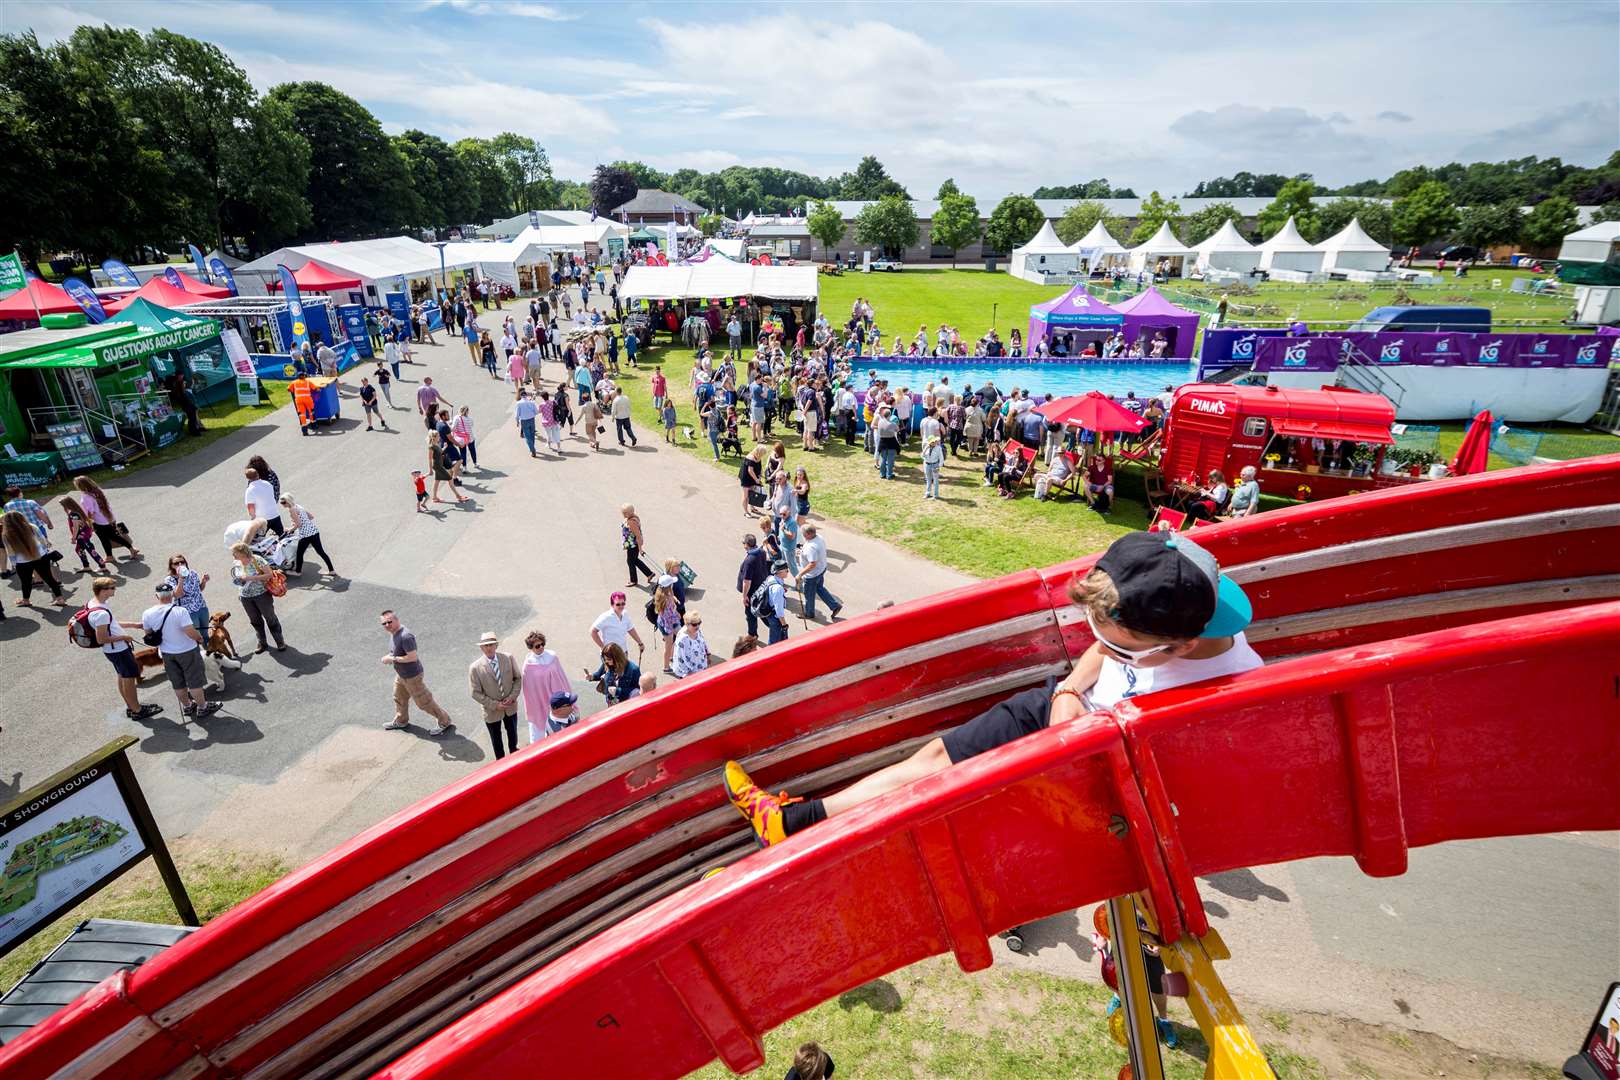 The Kent County Show is taking place next month